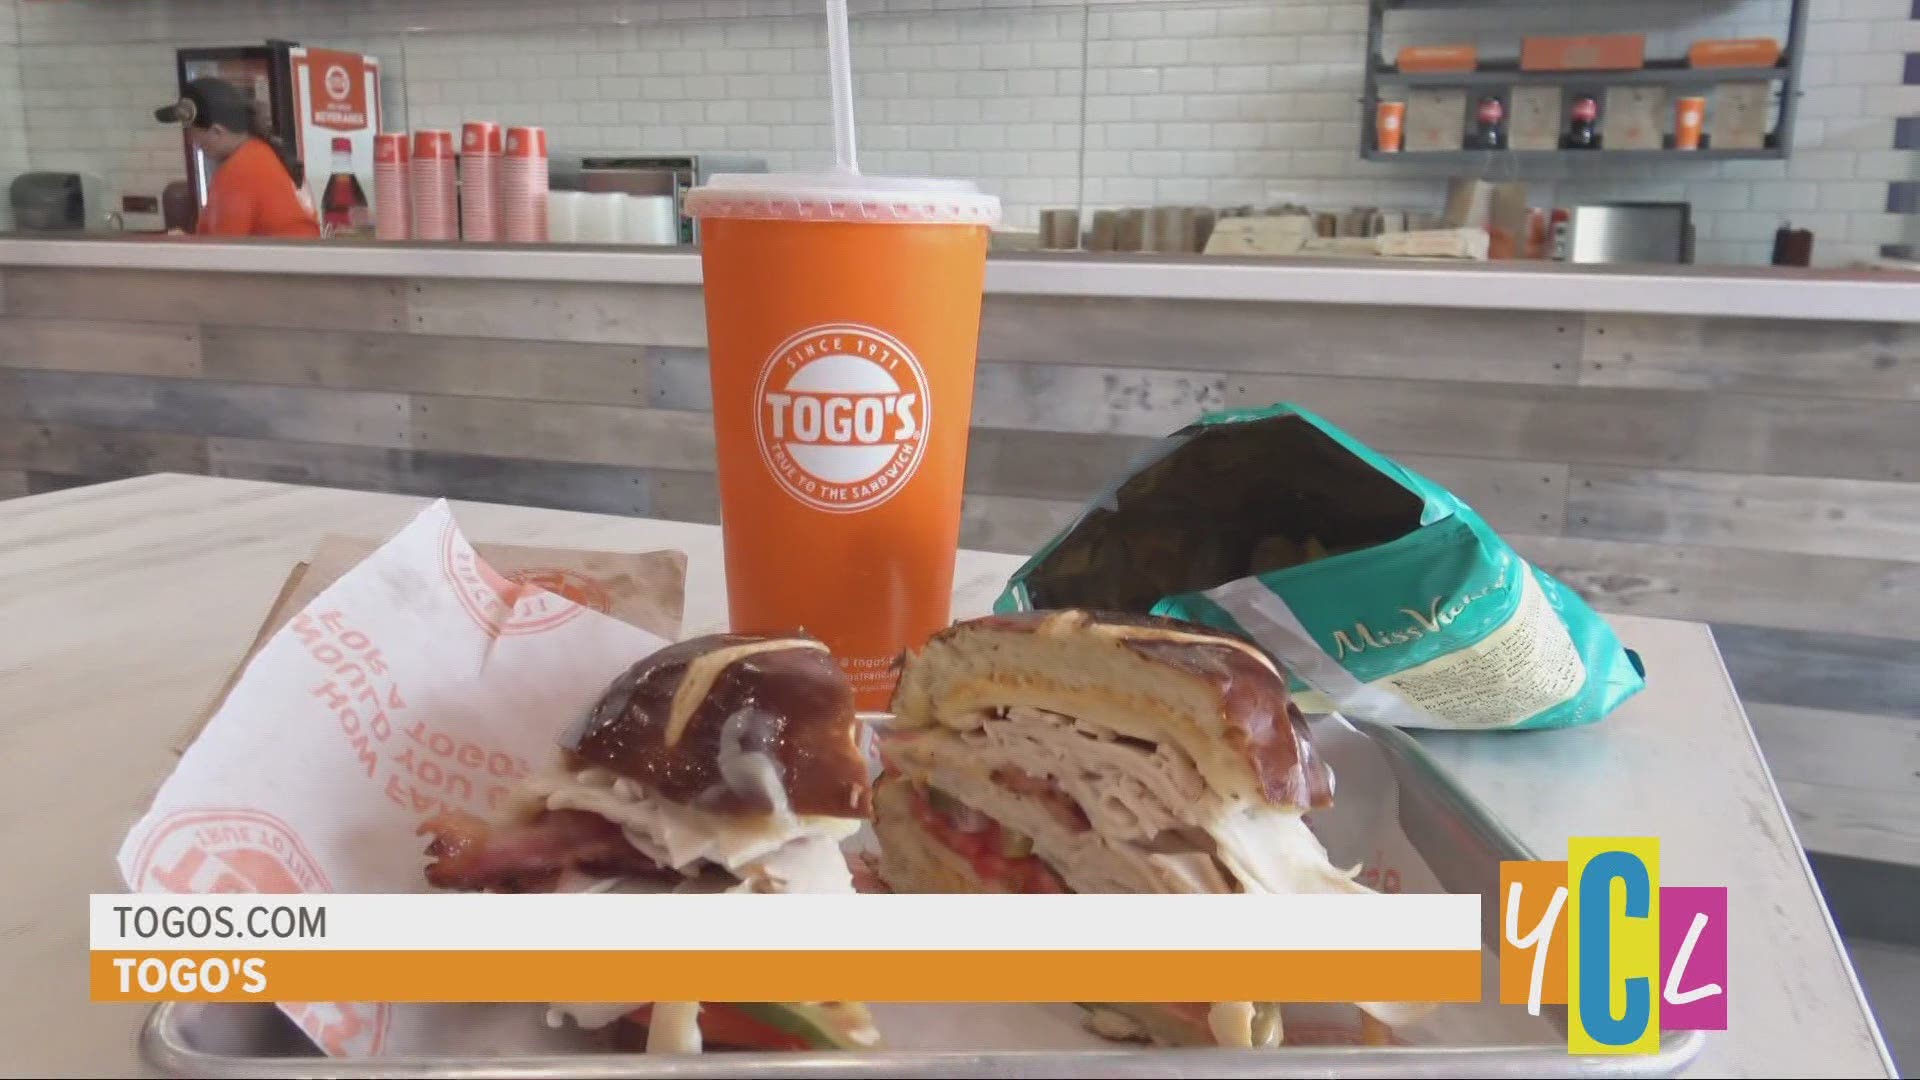 Find out what else is new at Togo’s! The following is a paid segment sponsored by Togo’s.